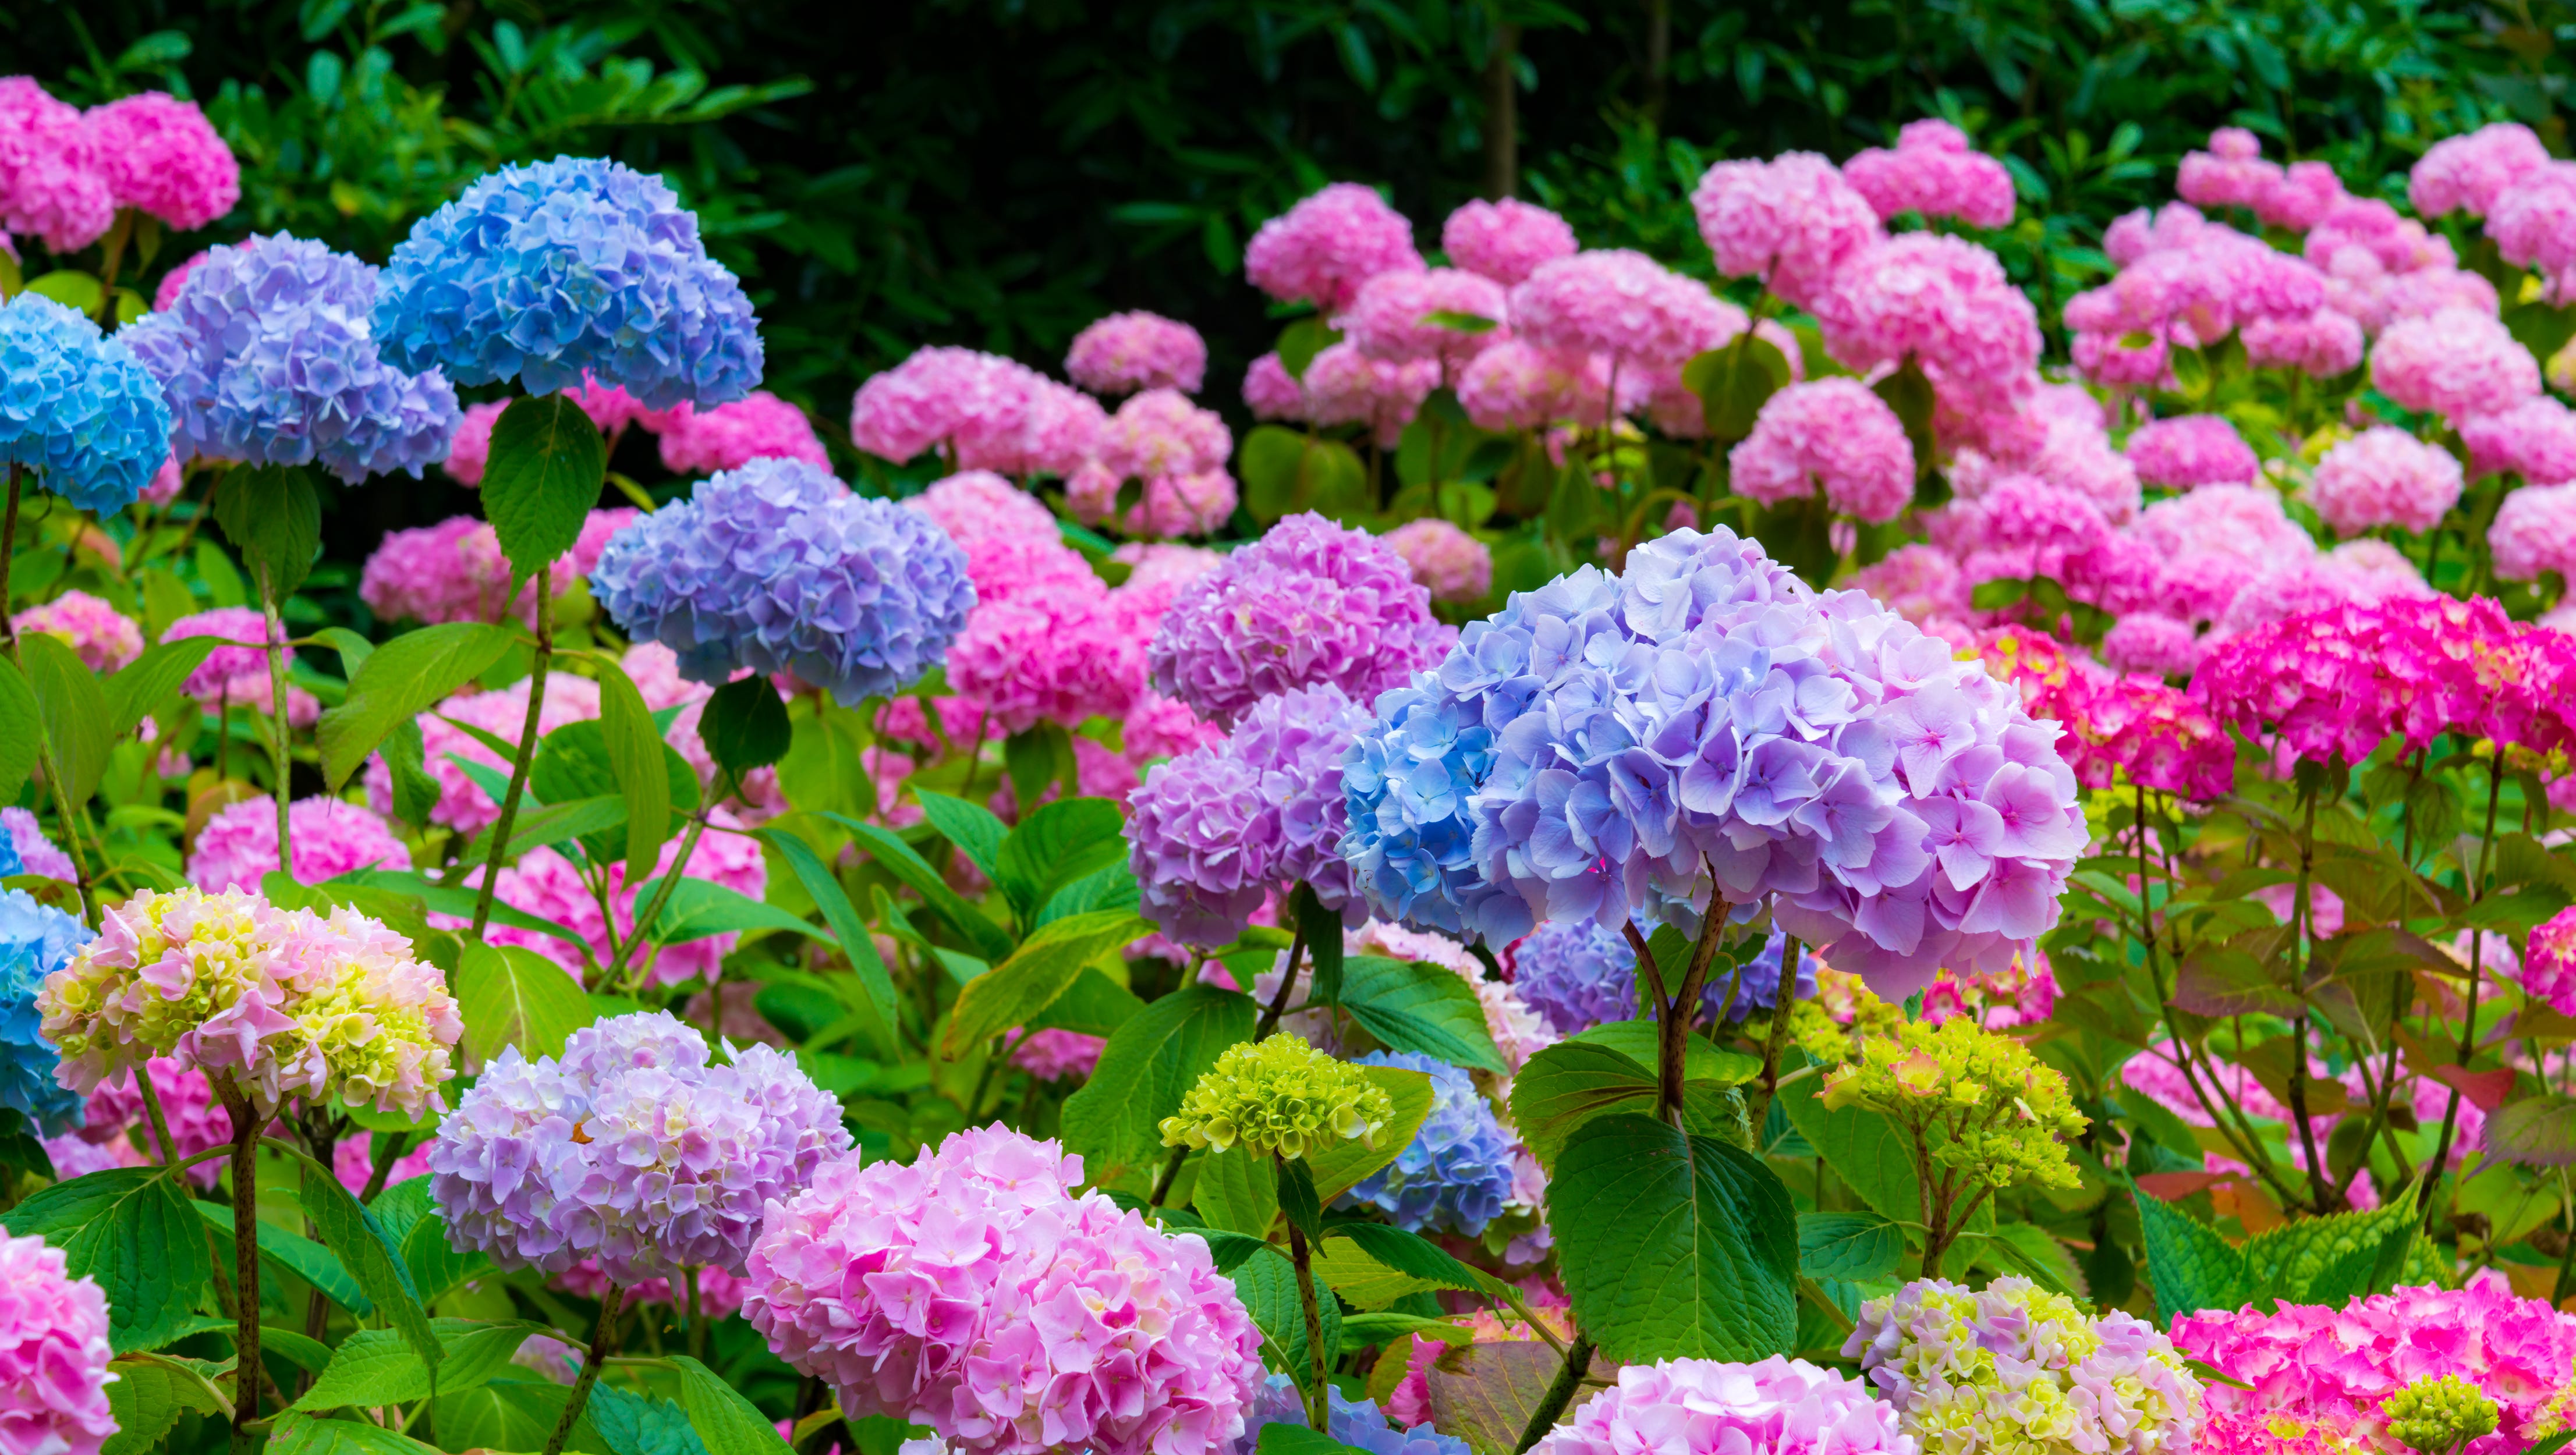 With some care hydrangeas can be the most beautiful flower in your garden